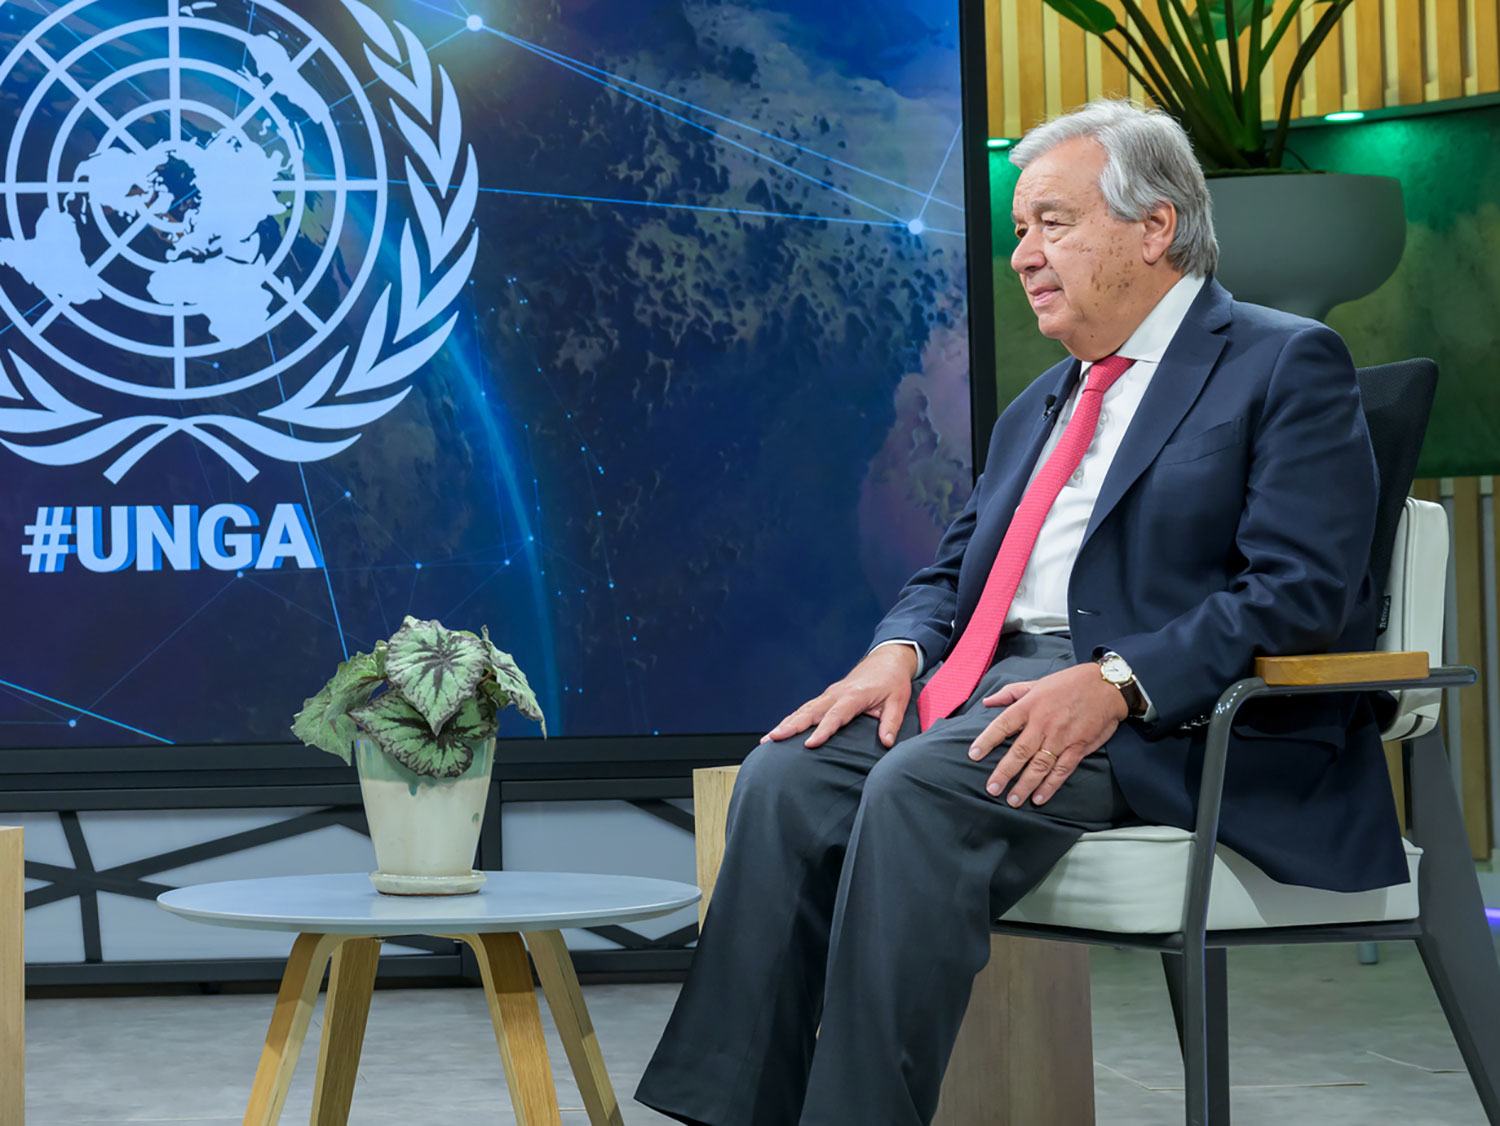 PODCAST: Nevermind the guest list, deliver on SDGs says Guterres